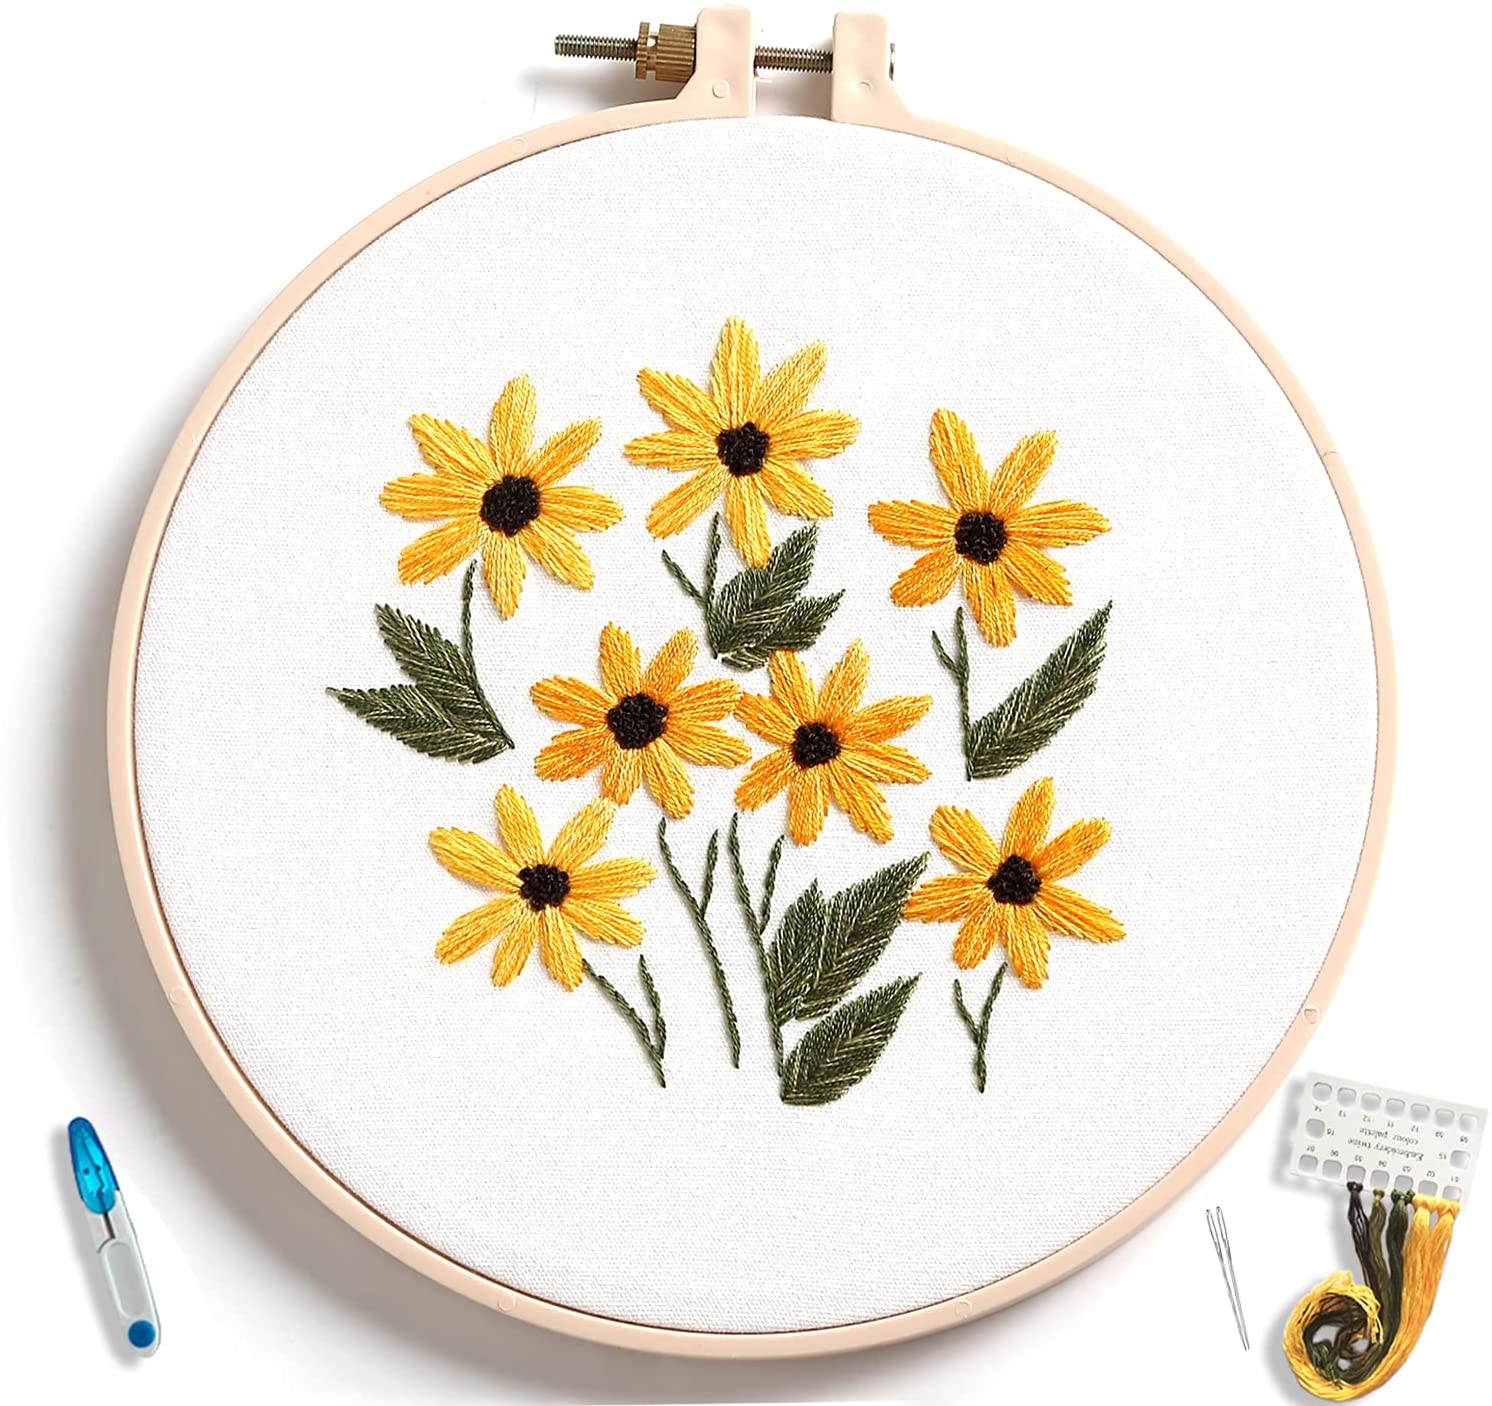 Beginner Embroidery Kit with Pattern and Needle, Hand Stamped Embroidery  Kits for Adults with Instructions Include Color Thread, Plastic Hoop &  Cotton